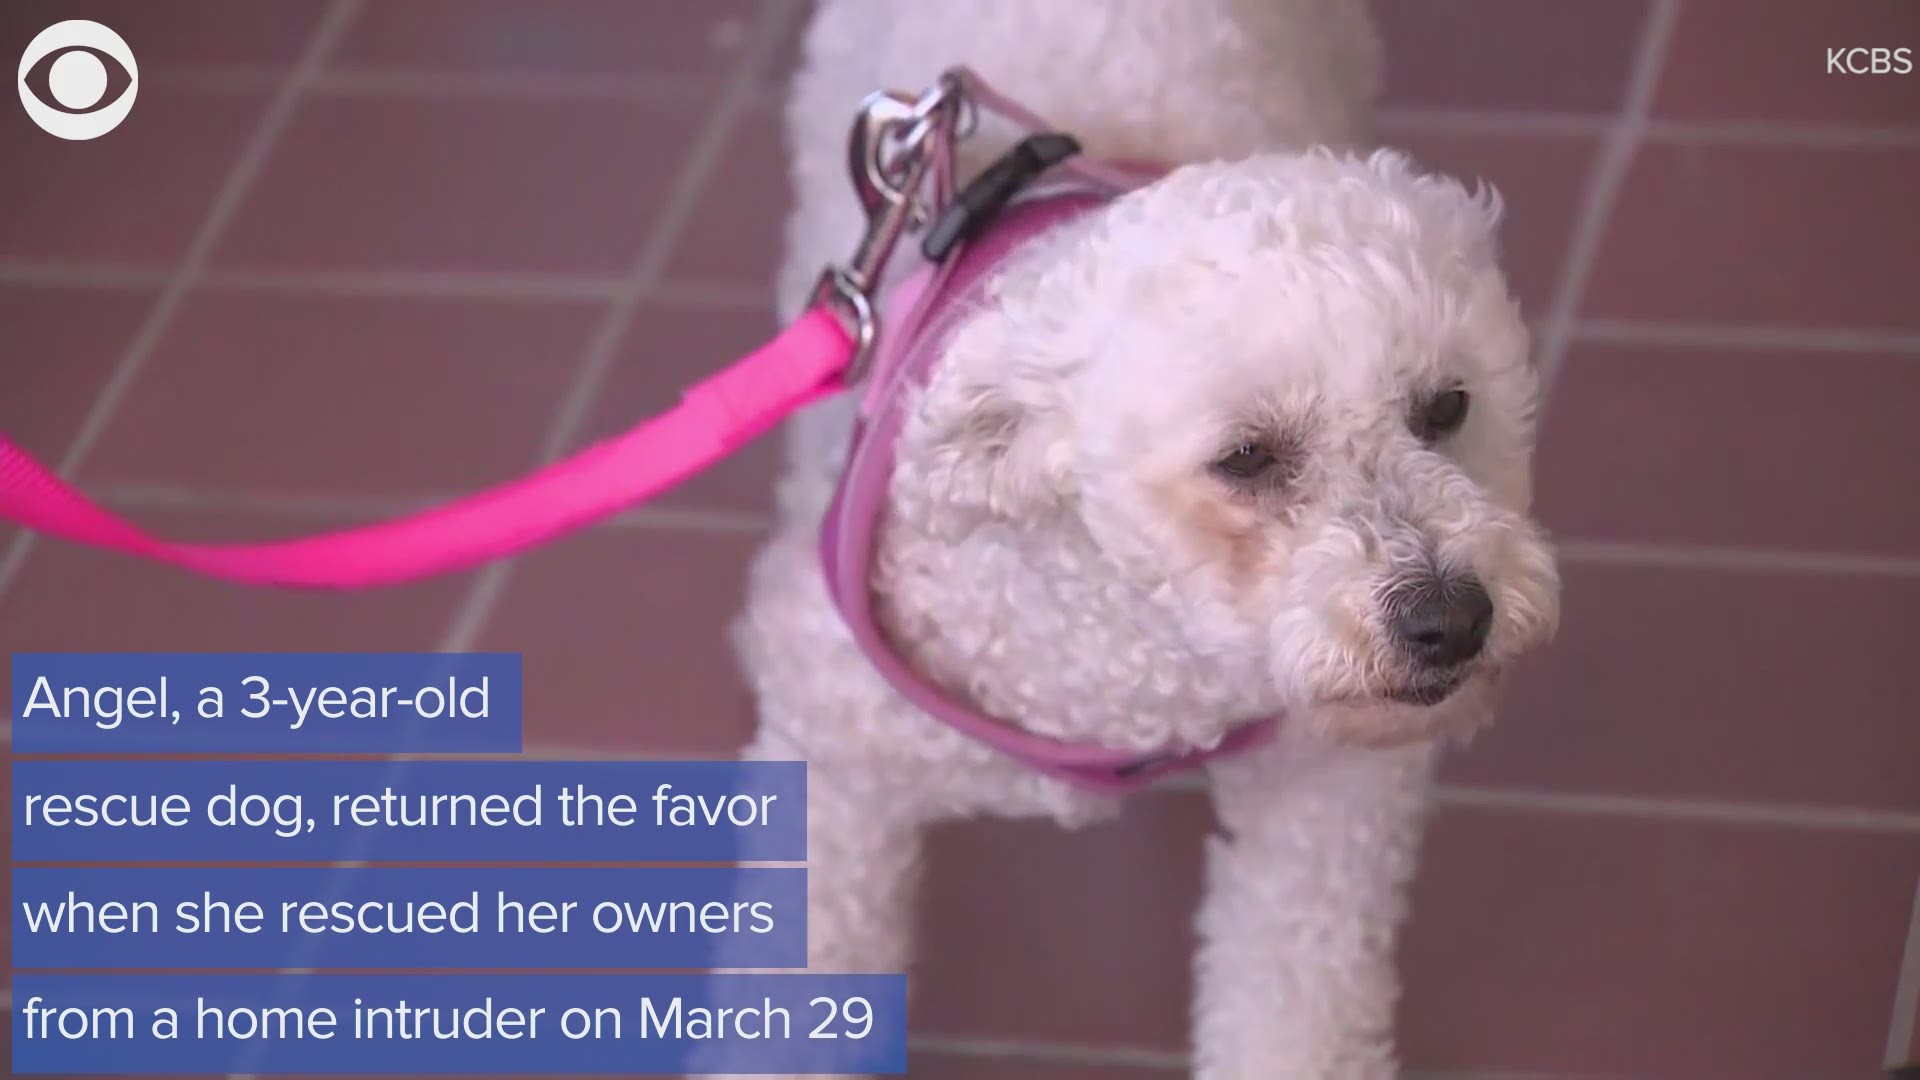 A rescue dog returned the favor when she saved her owners from a home intruder.